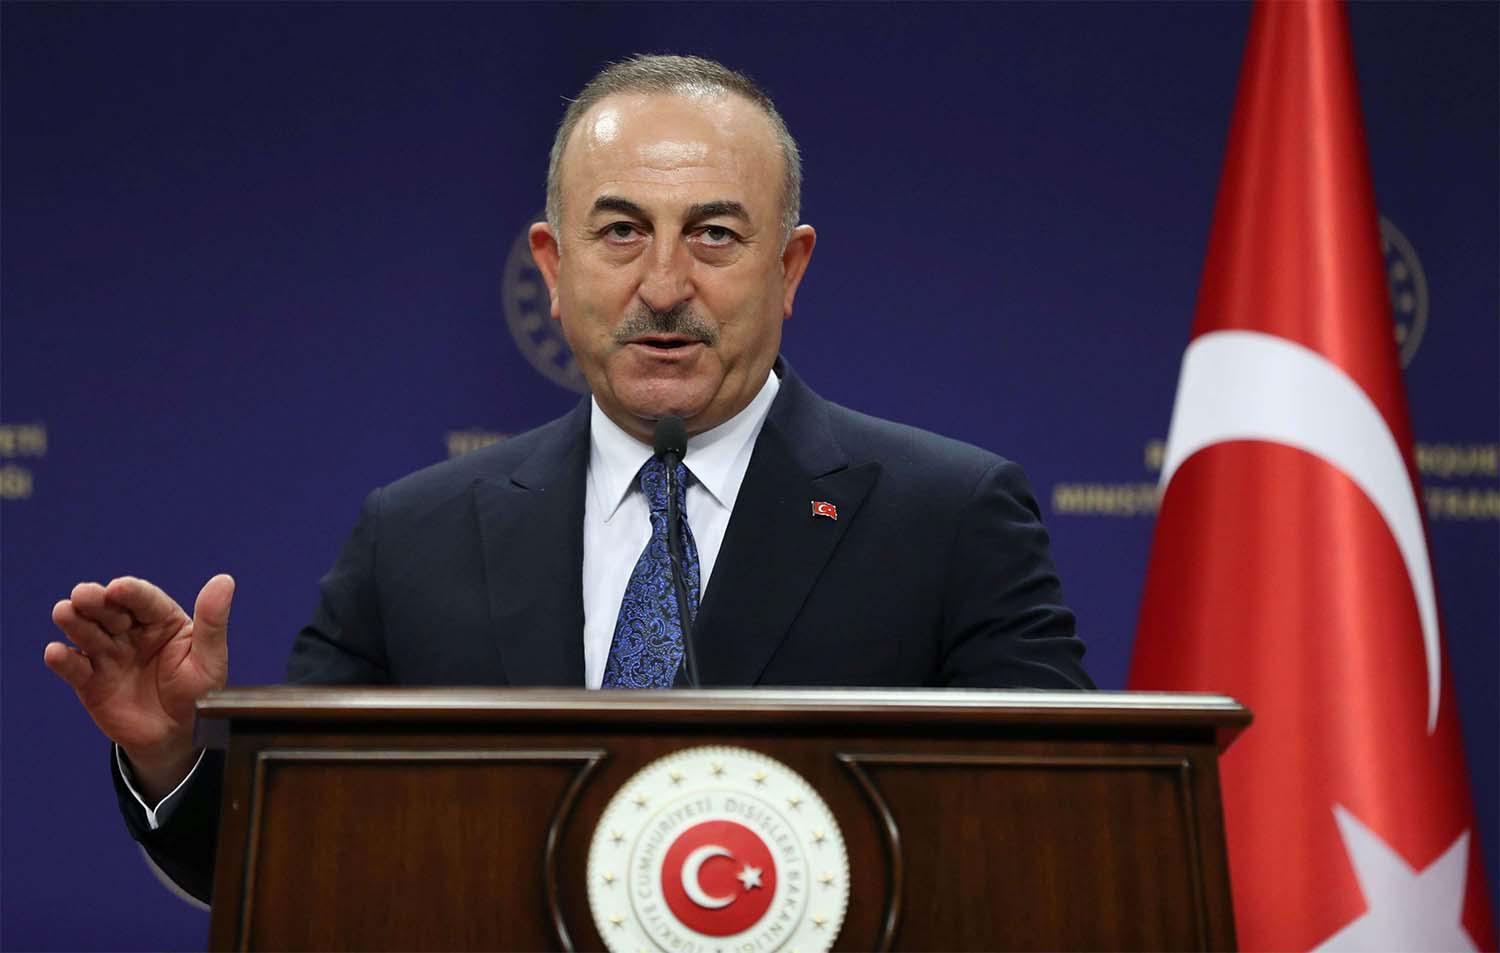 Turkish FM described the US sanctions as wrong both legally and politically